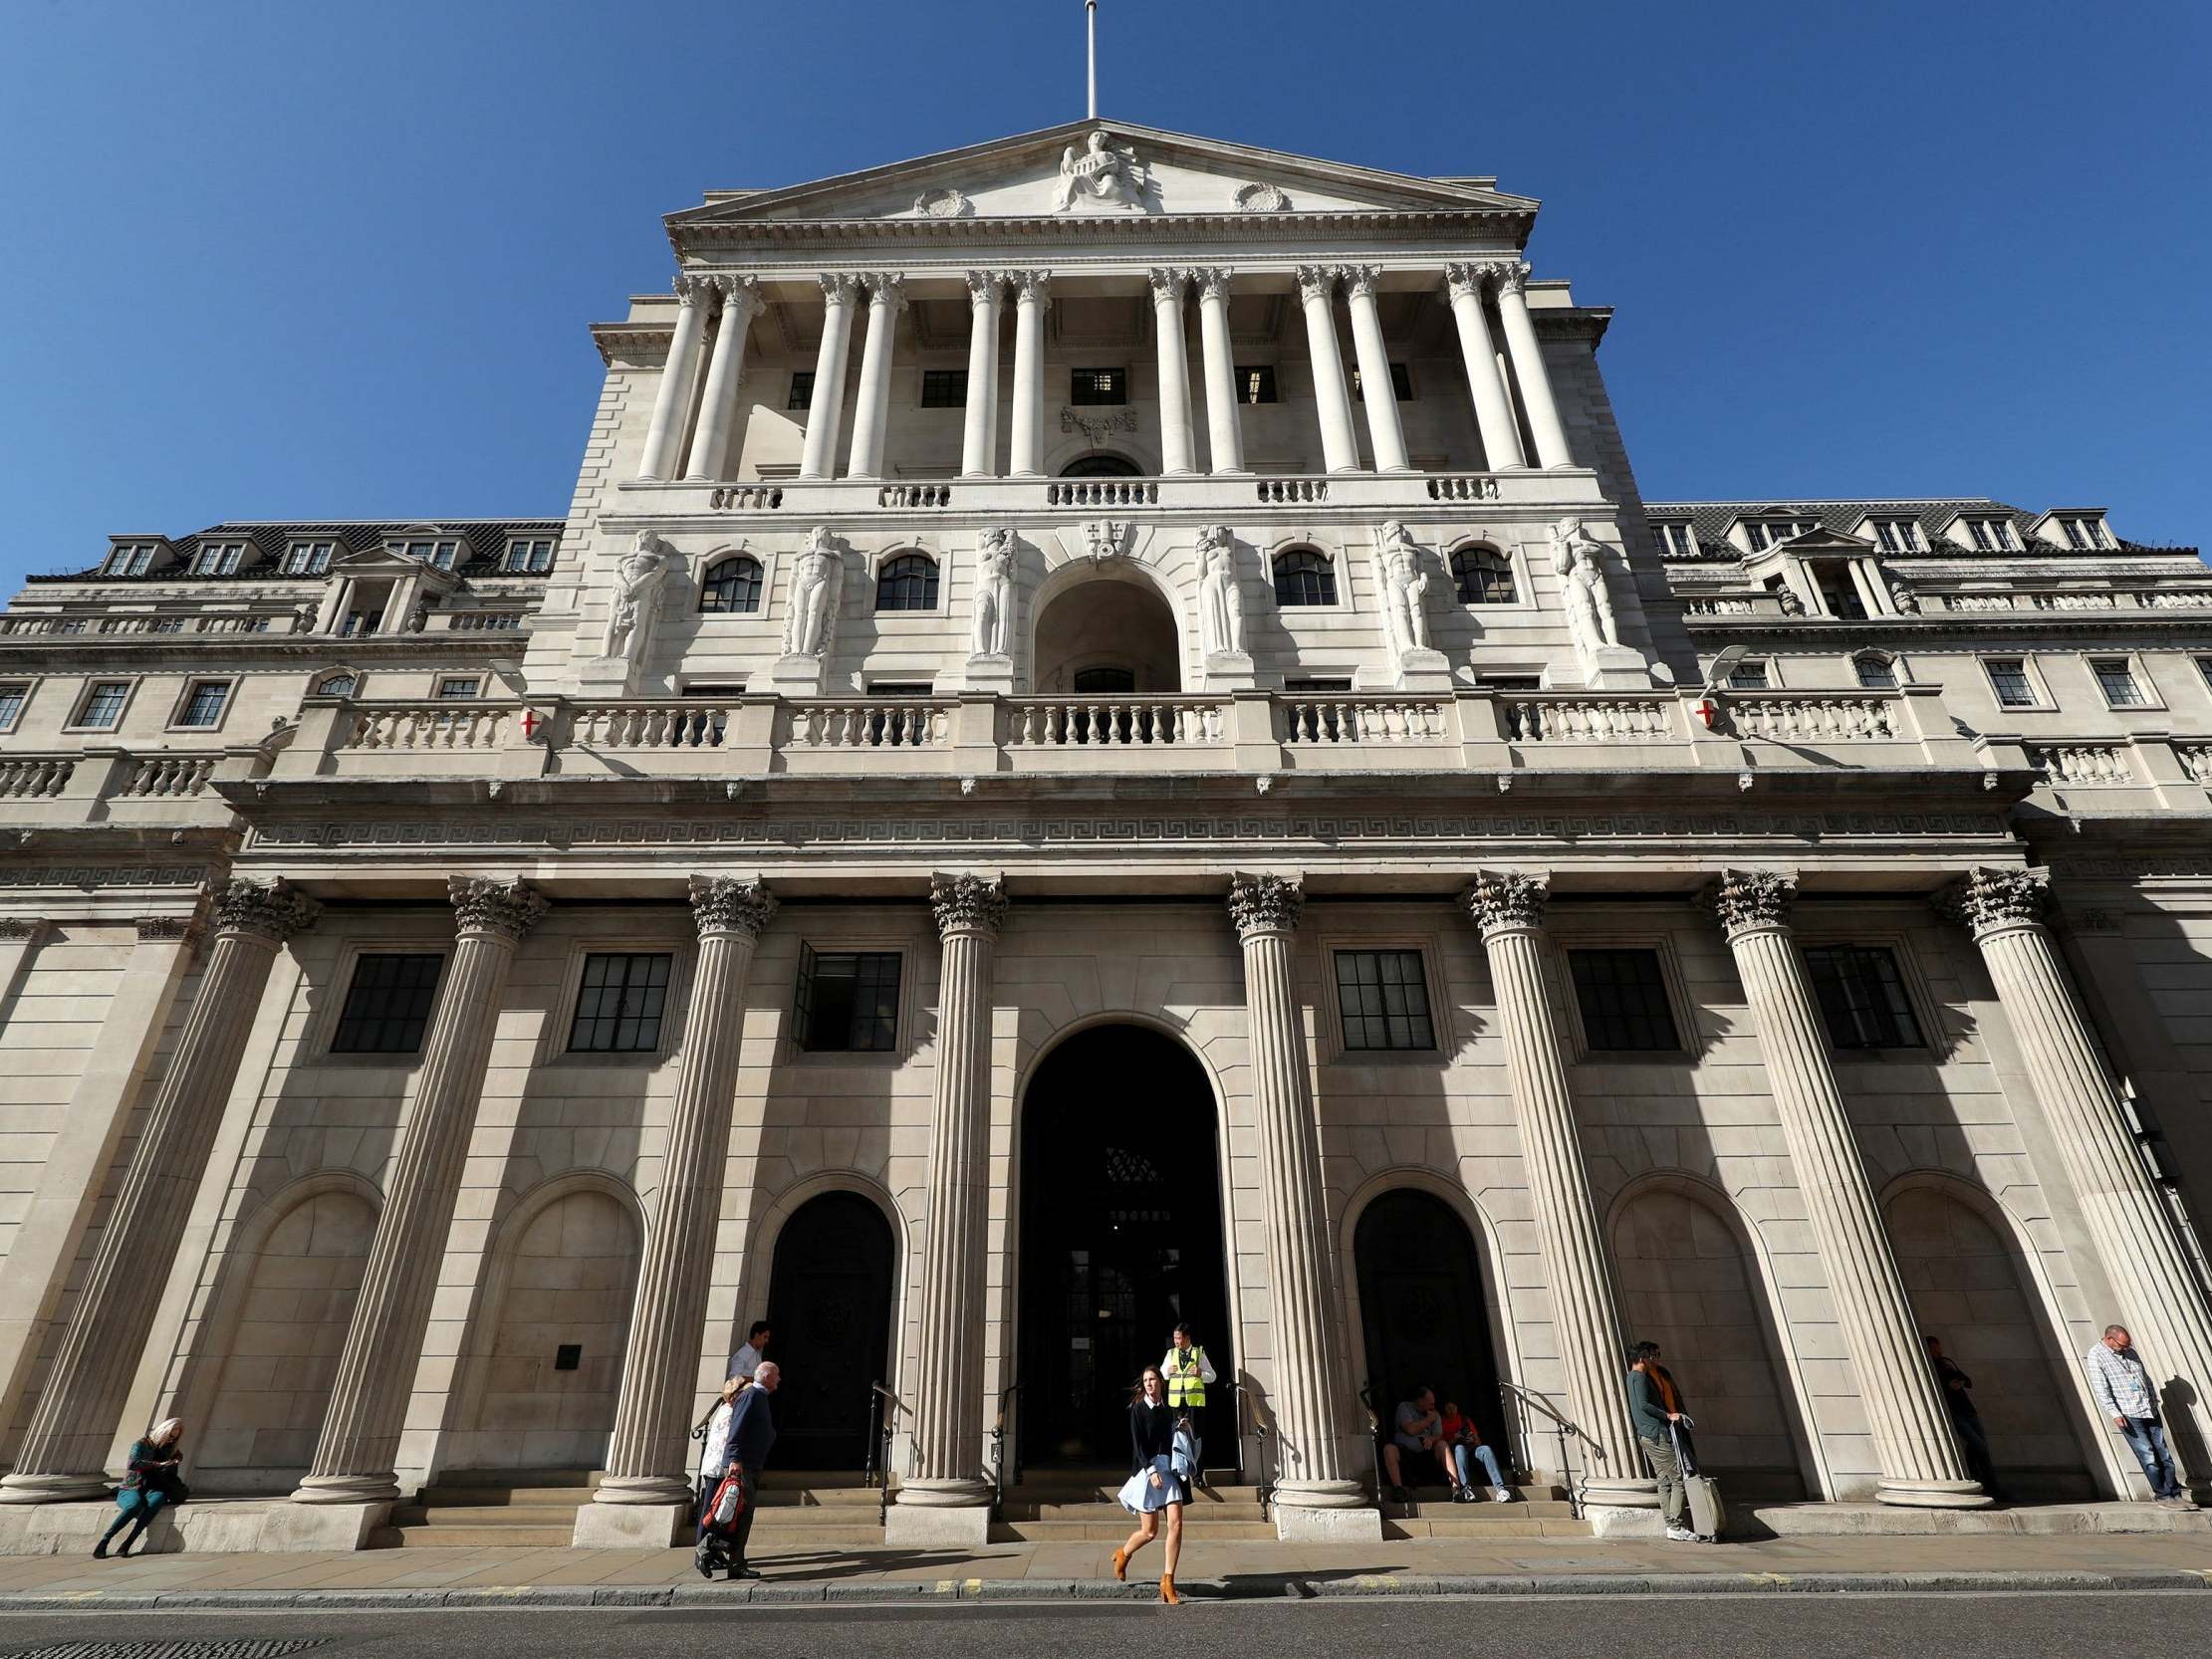 The Bank of England has demanded that UK banks submit to stress tests since 2014